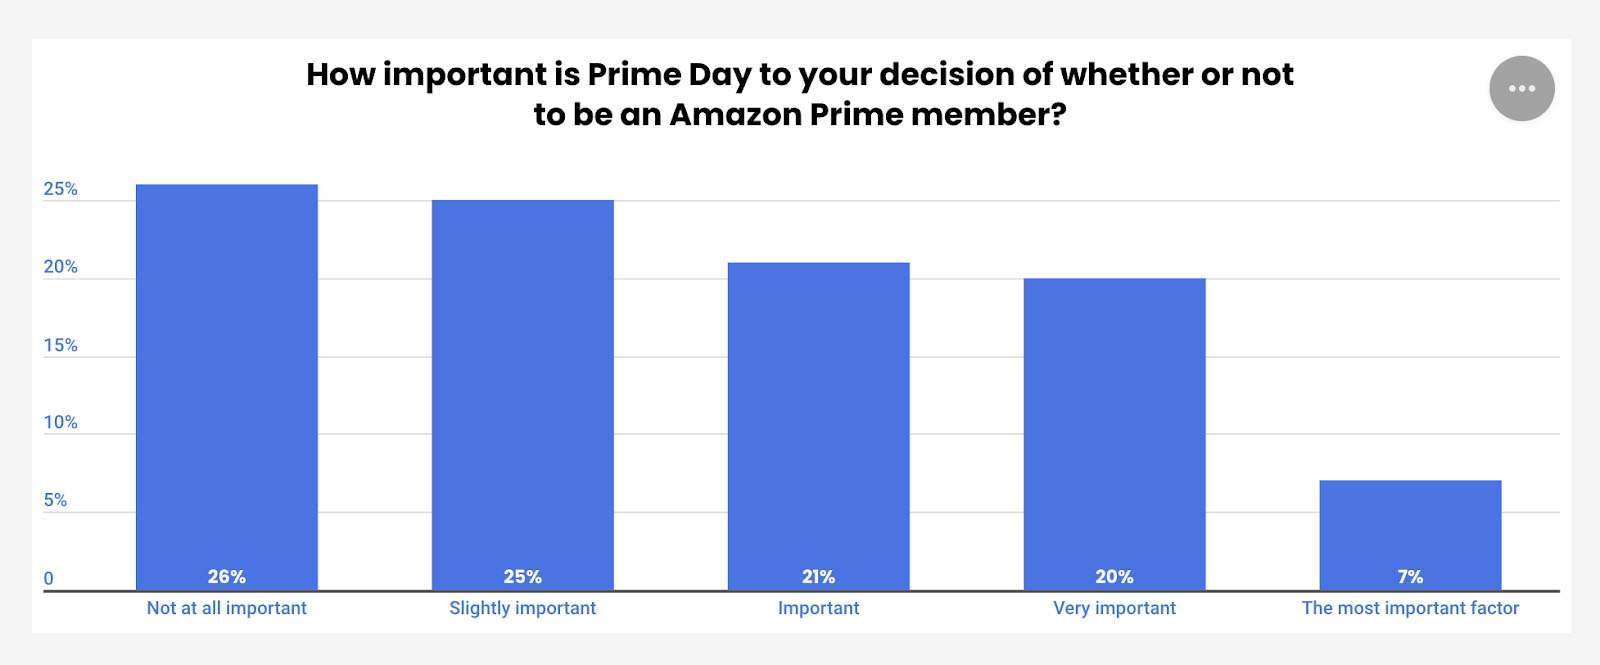 Graph of survey results showing importance of Prime Day for Amazon Prime membership.